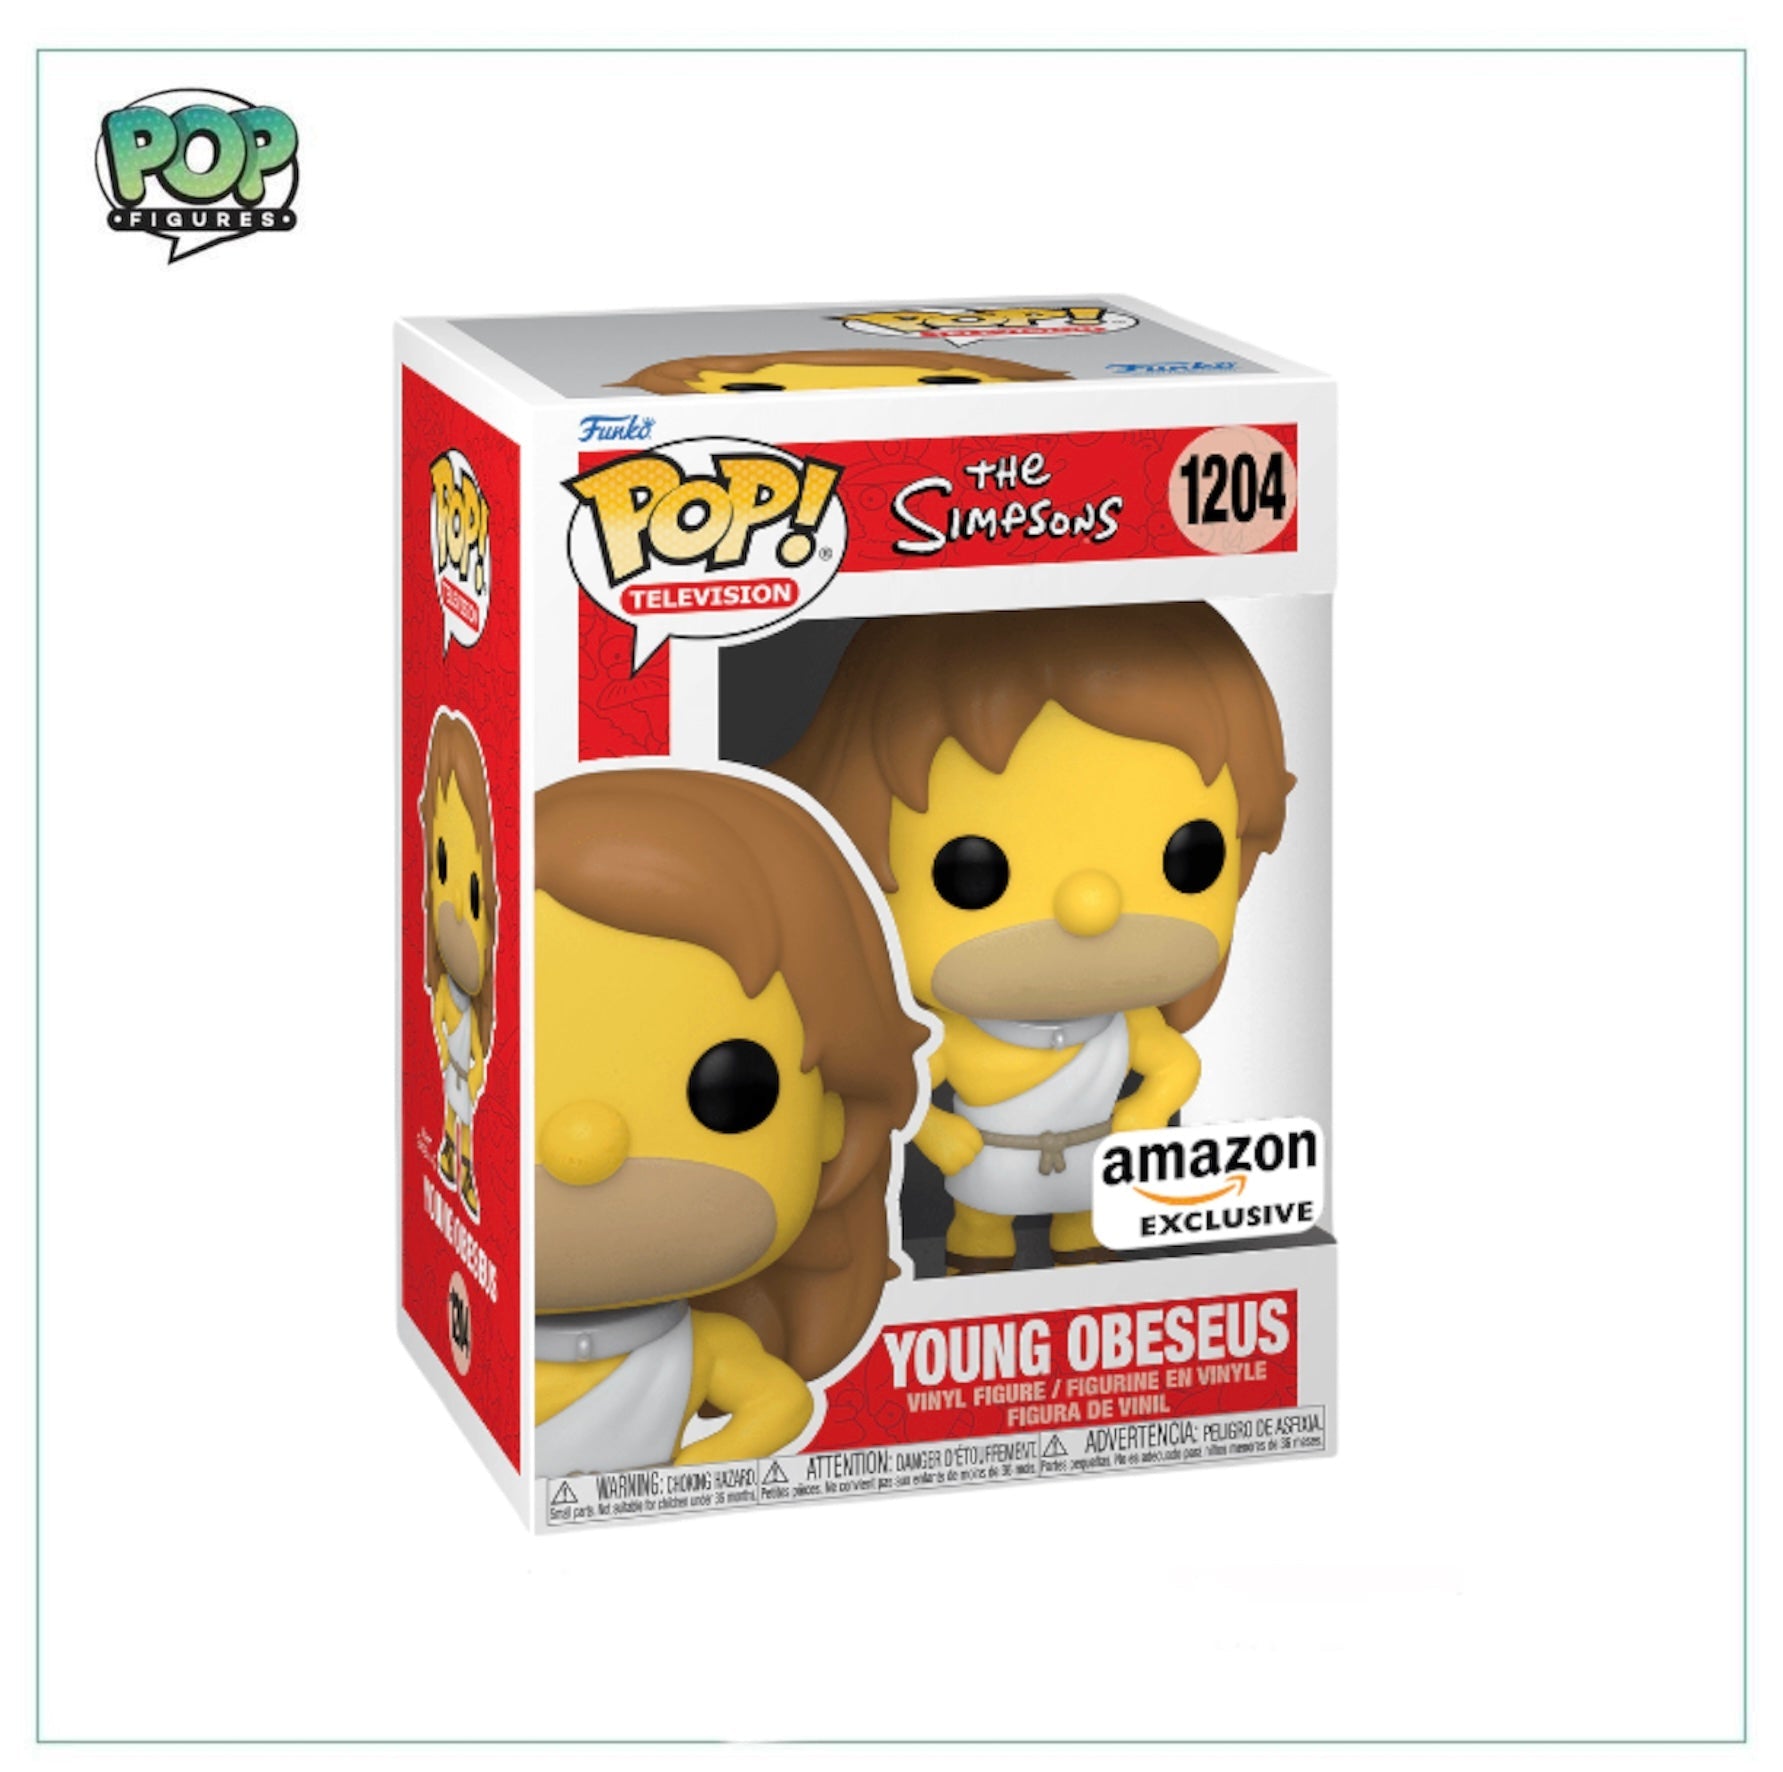 Young Obeseus #1204 Funko Pop! The Simpsons - Amazon Exclusive - Angry Cat